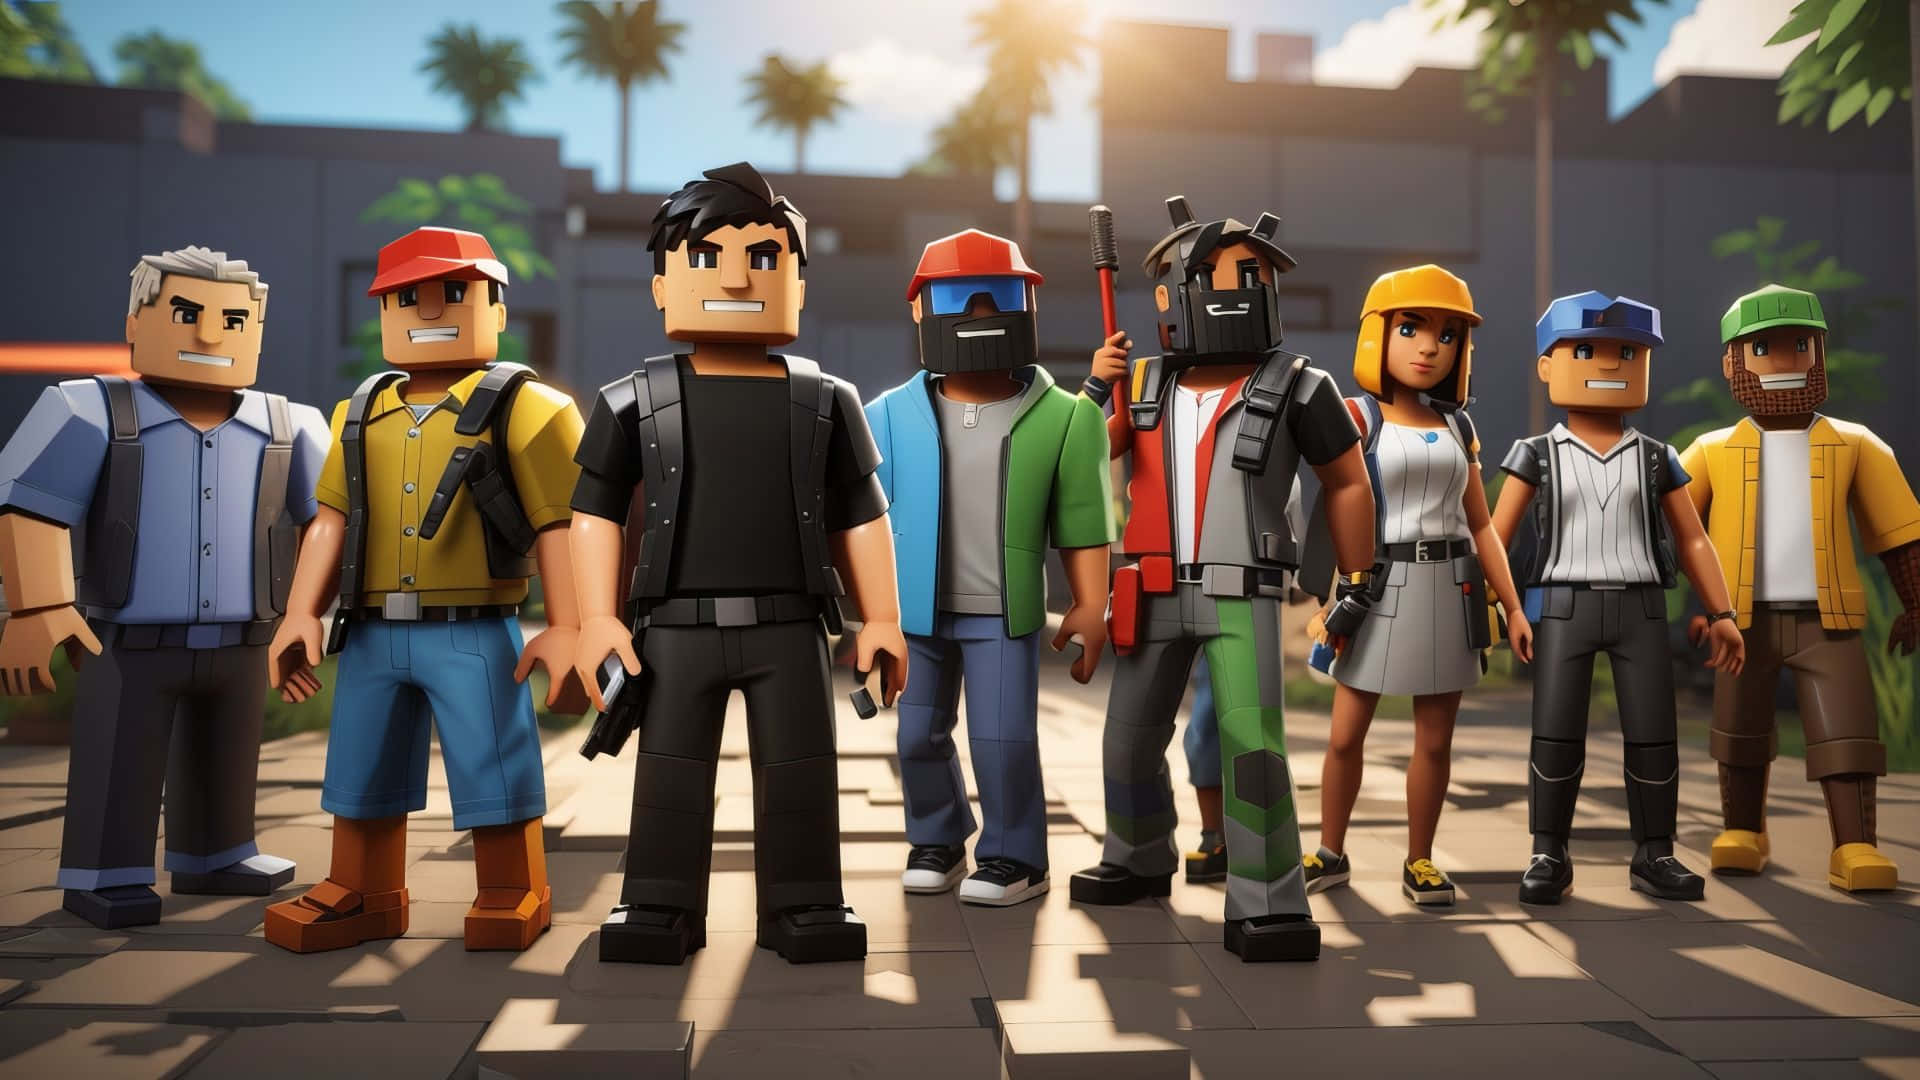 Roblox Characters Group Pose Wallpaper